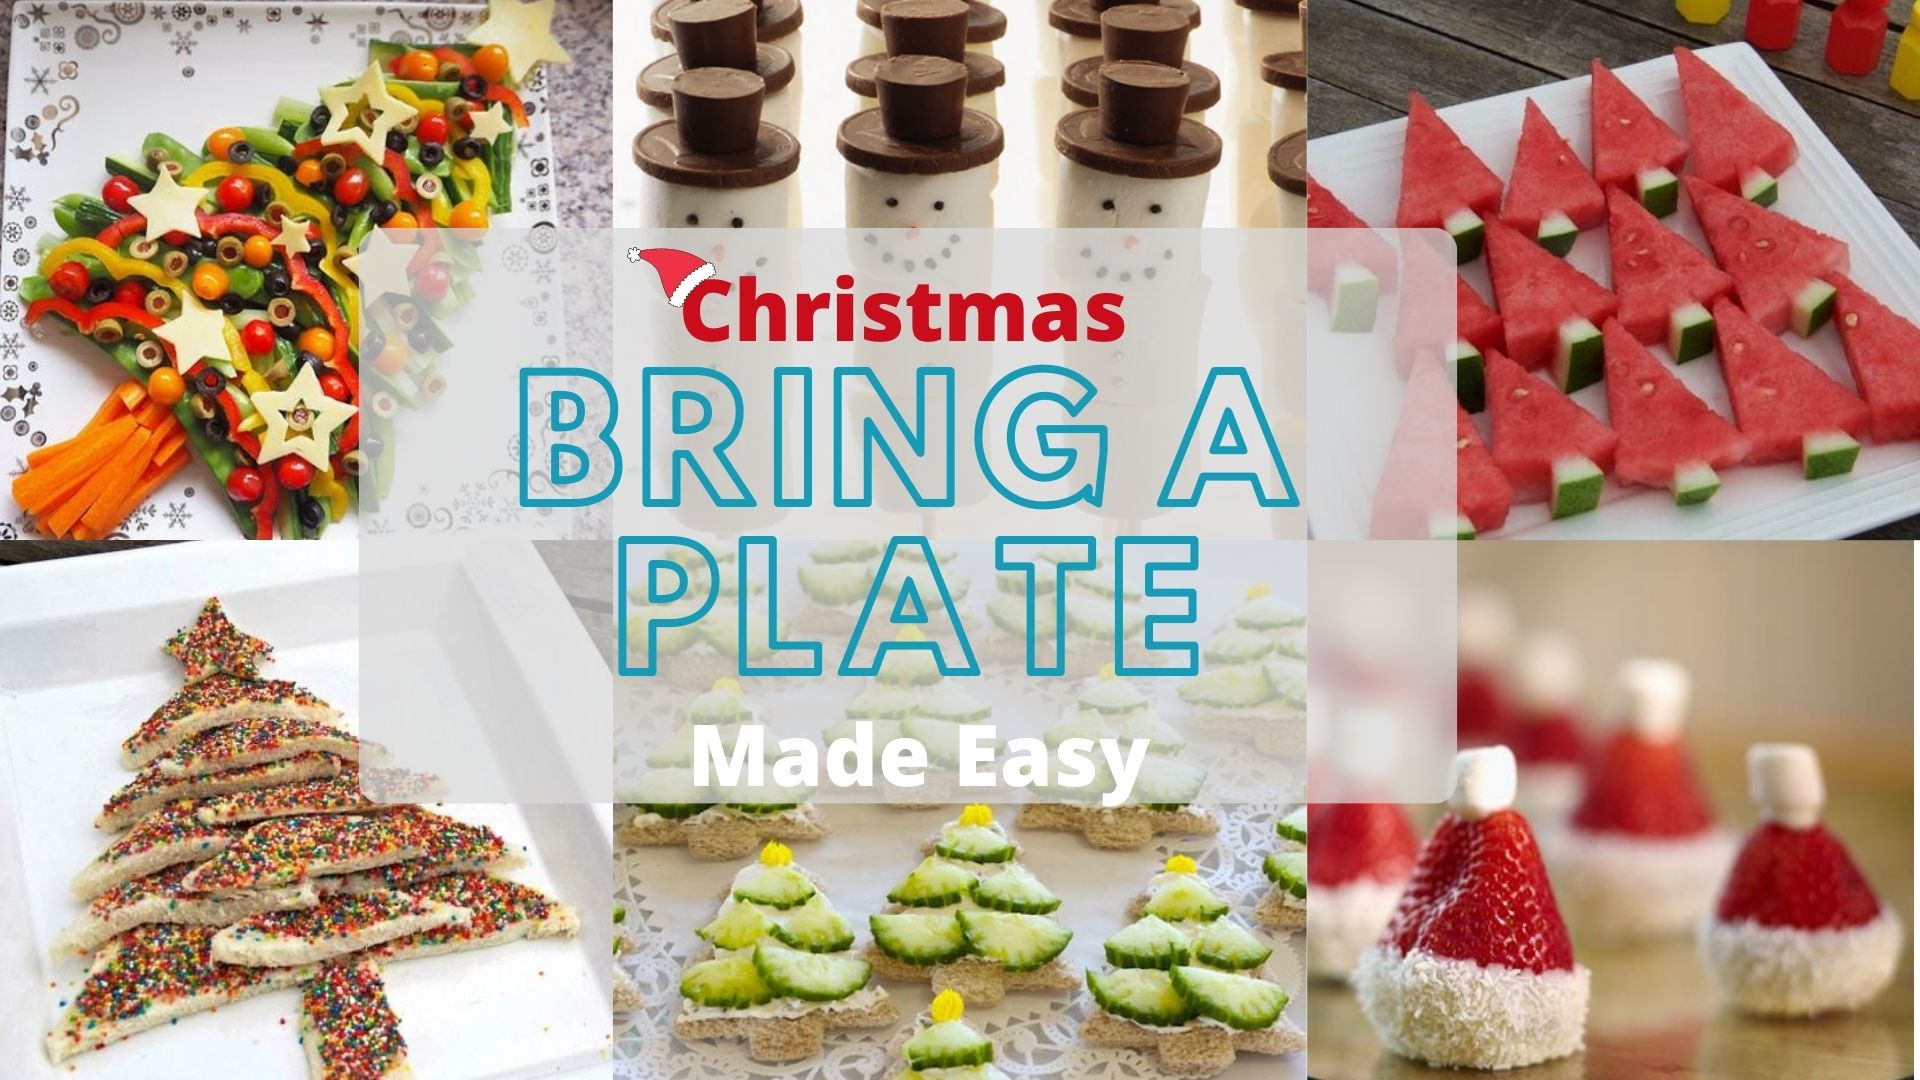 Christmas Bring A Plate